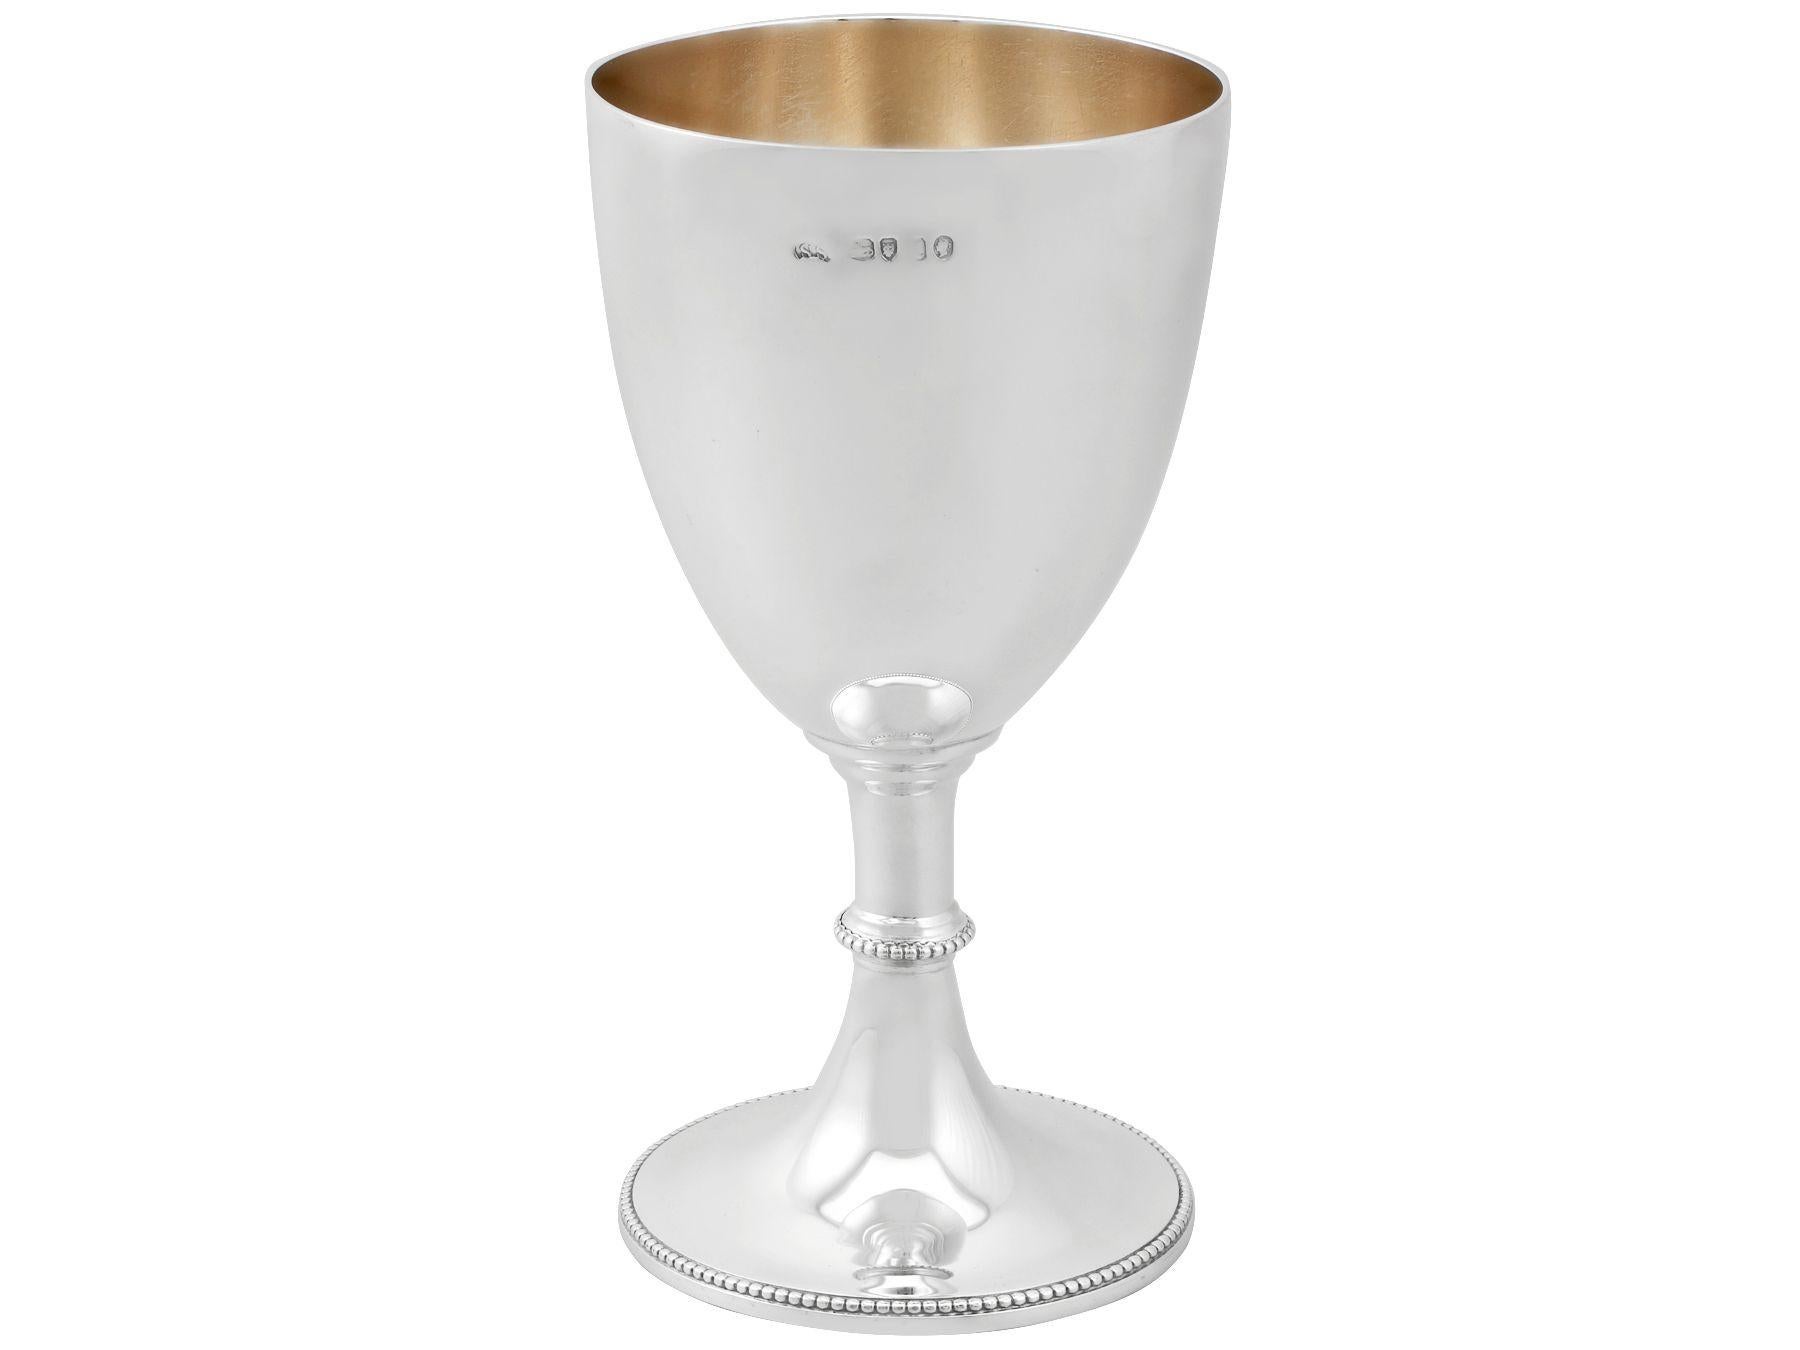 An exceptional, fine and impressive antique Victorian sterling silver goblet; an addition to our wine and drinks related silverware collection.

This exceptional antique Victorian sterling silver goblet has a circular bell shaped form onto a swept